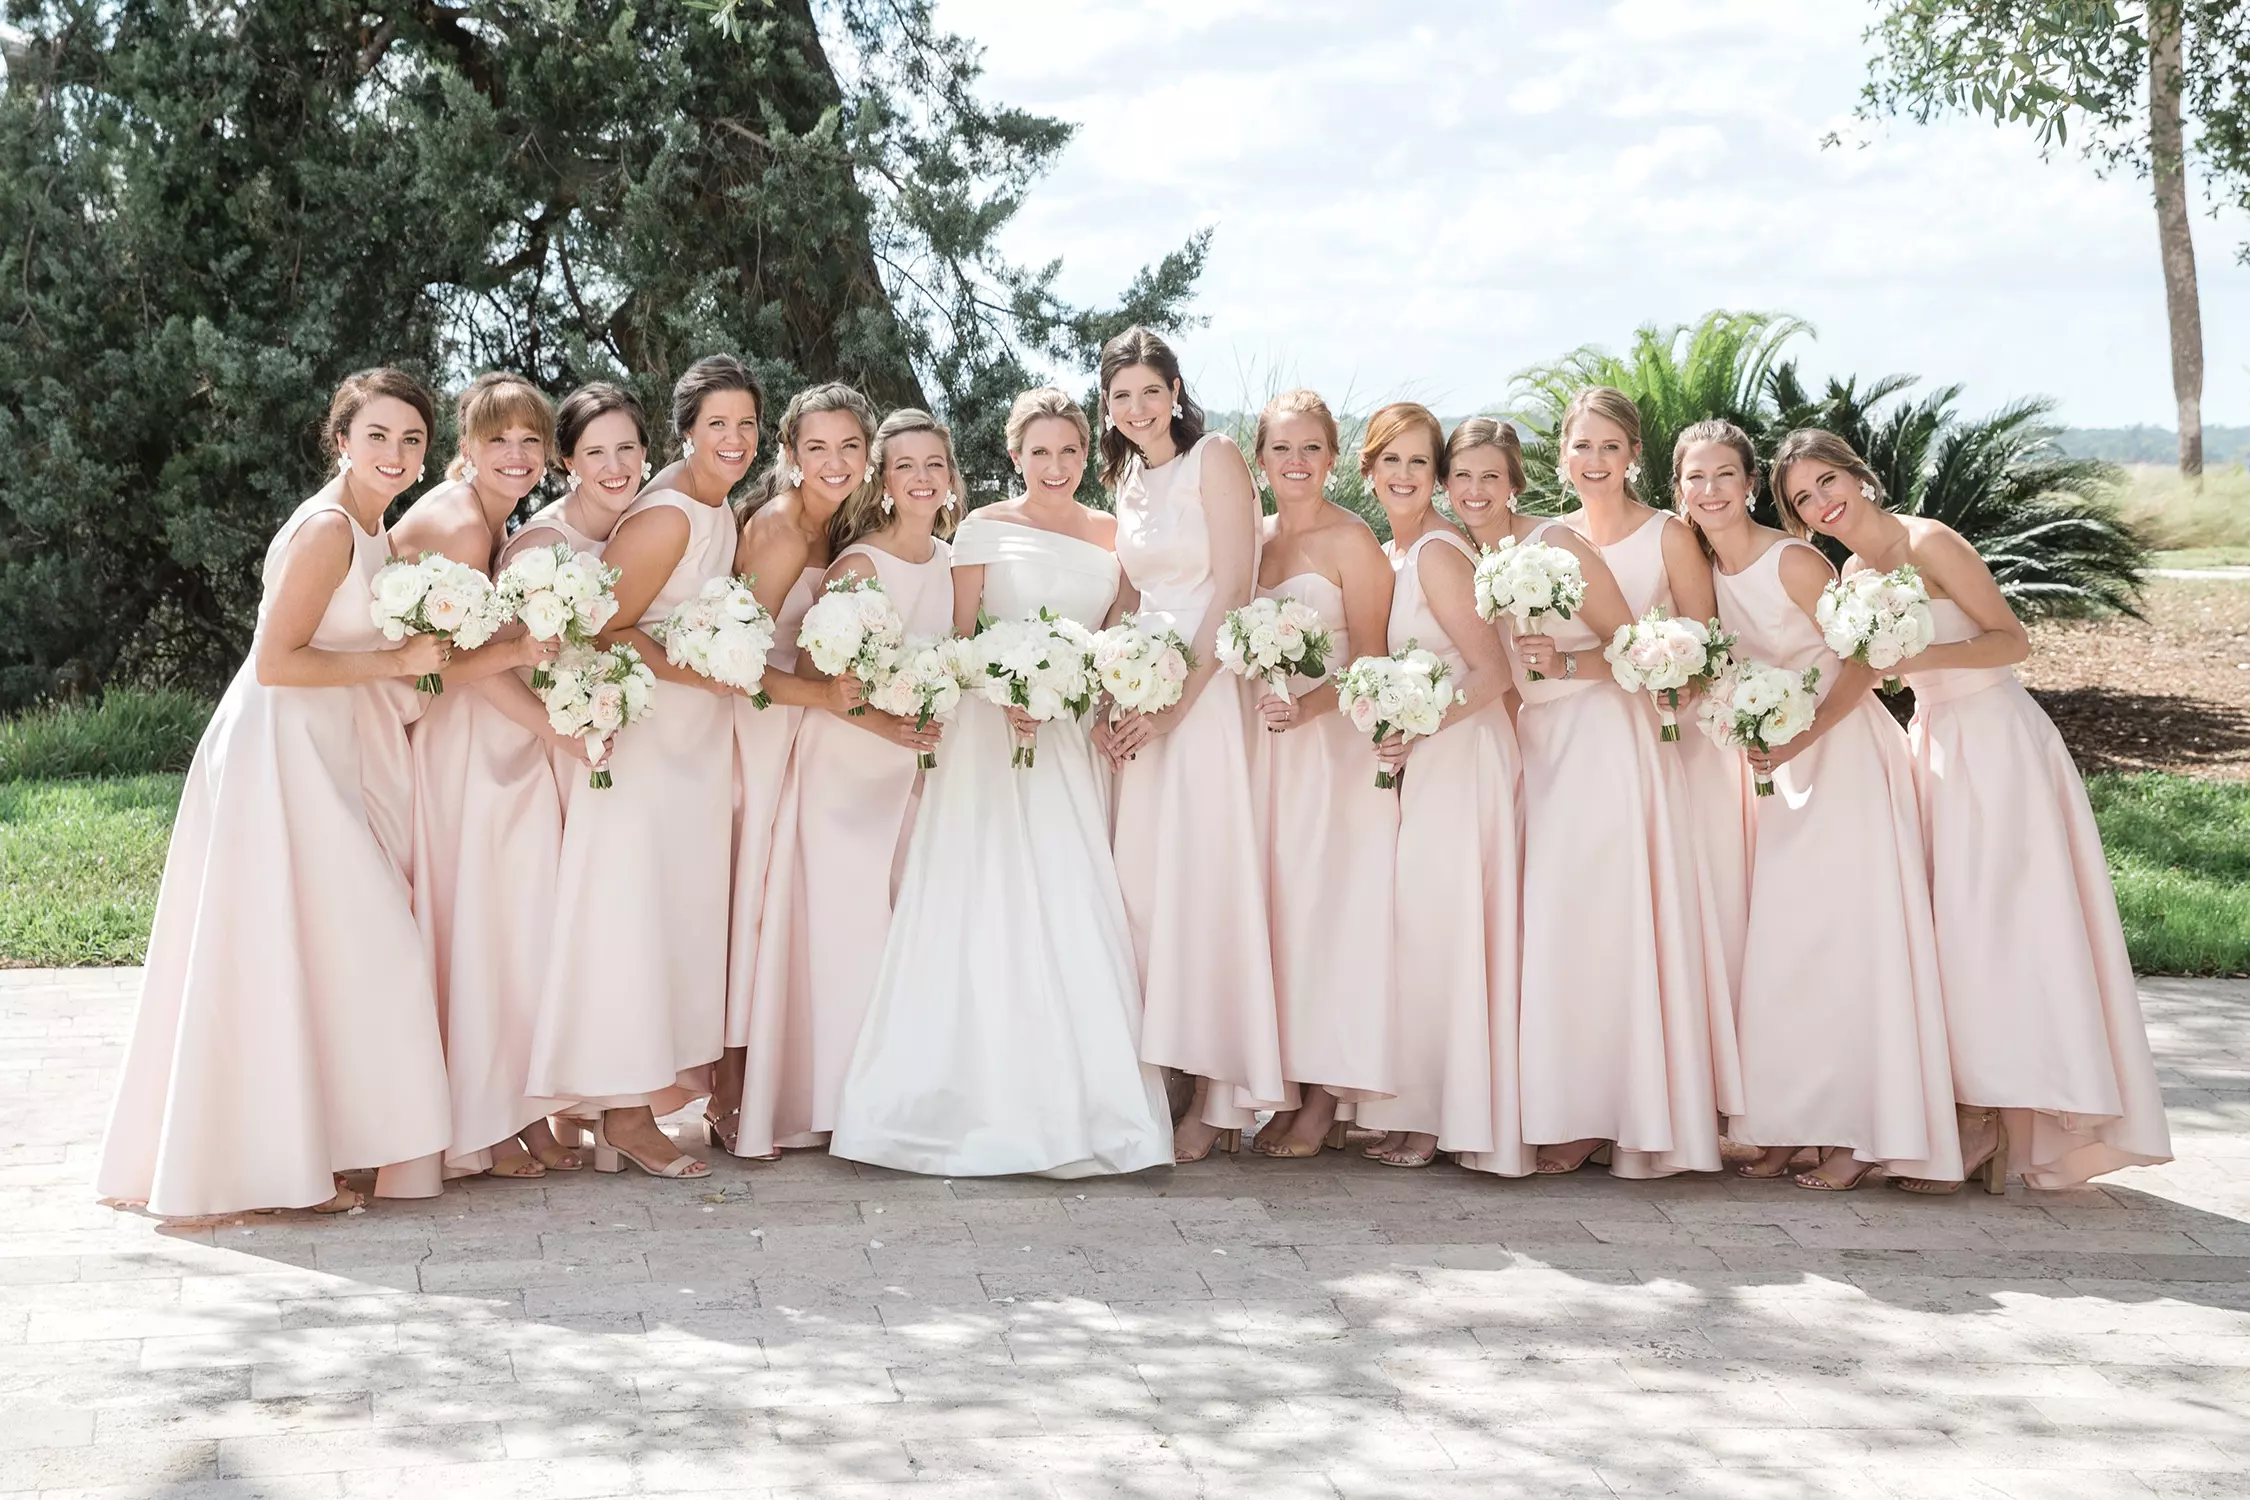 The Stylish Bride wedding day dressers, stylists, ladies in waiting, bridesmaids